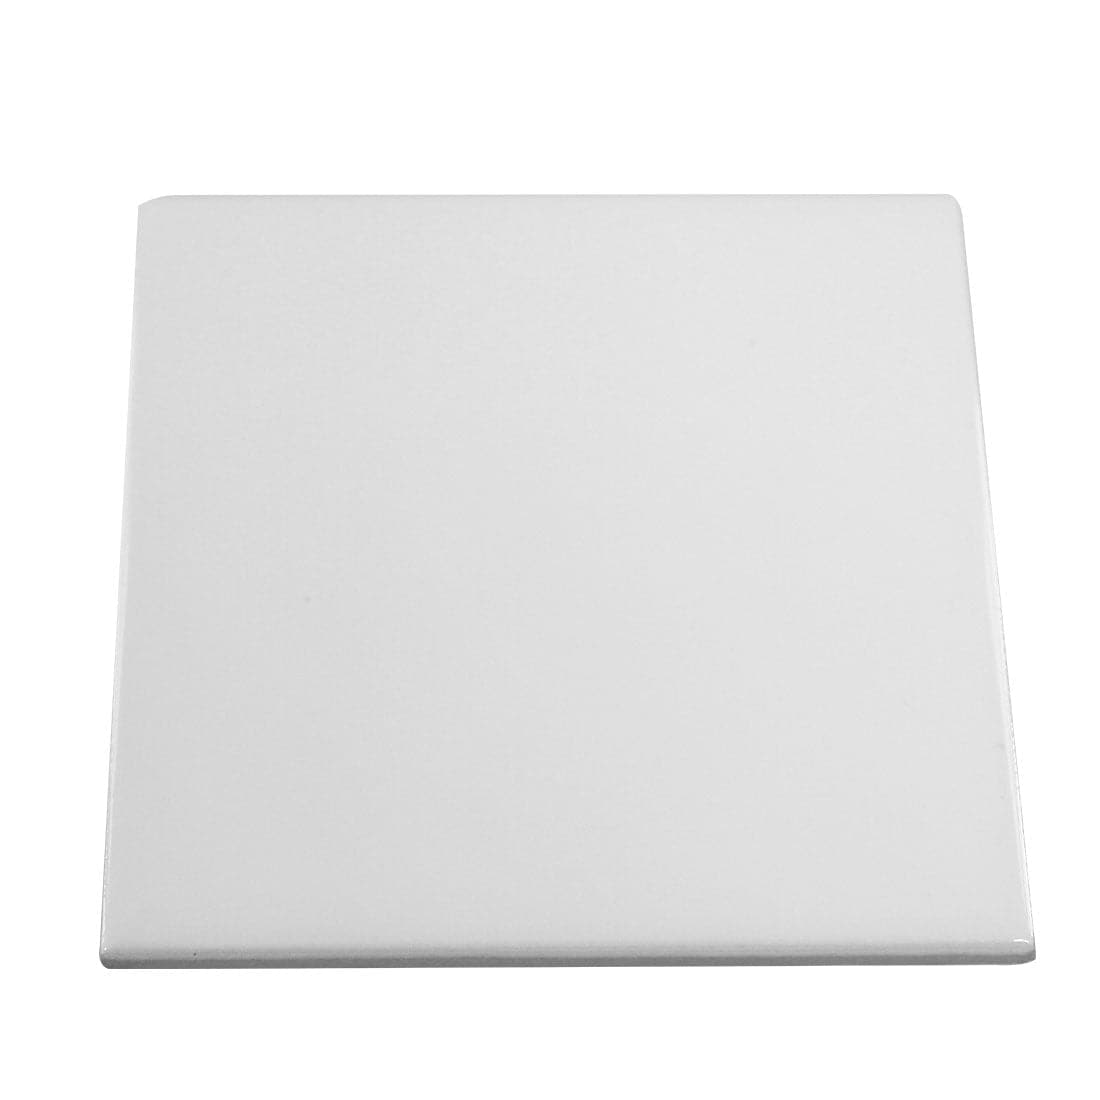 Pearl Coating™ Sublimation Tiles - Pack of 48 or 60 - Joto Imaging Supplies US